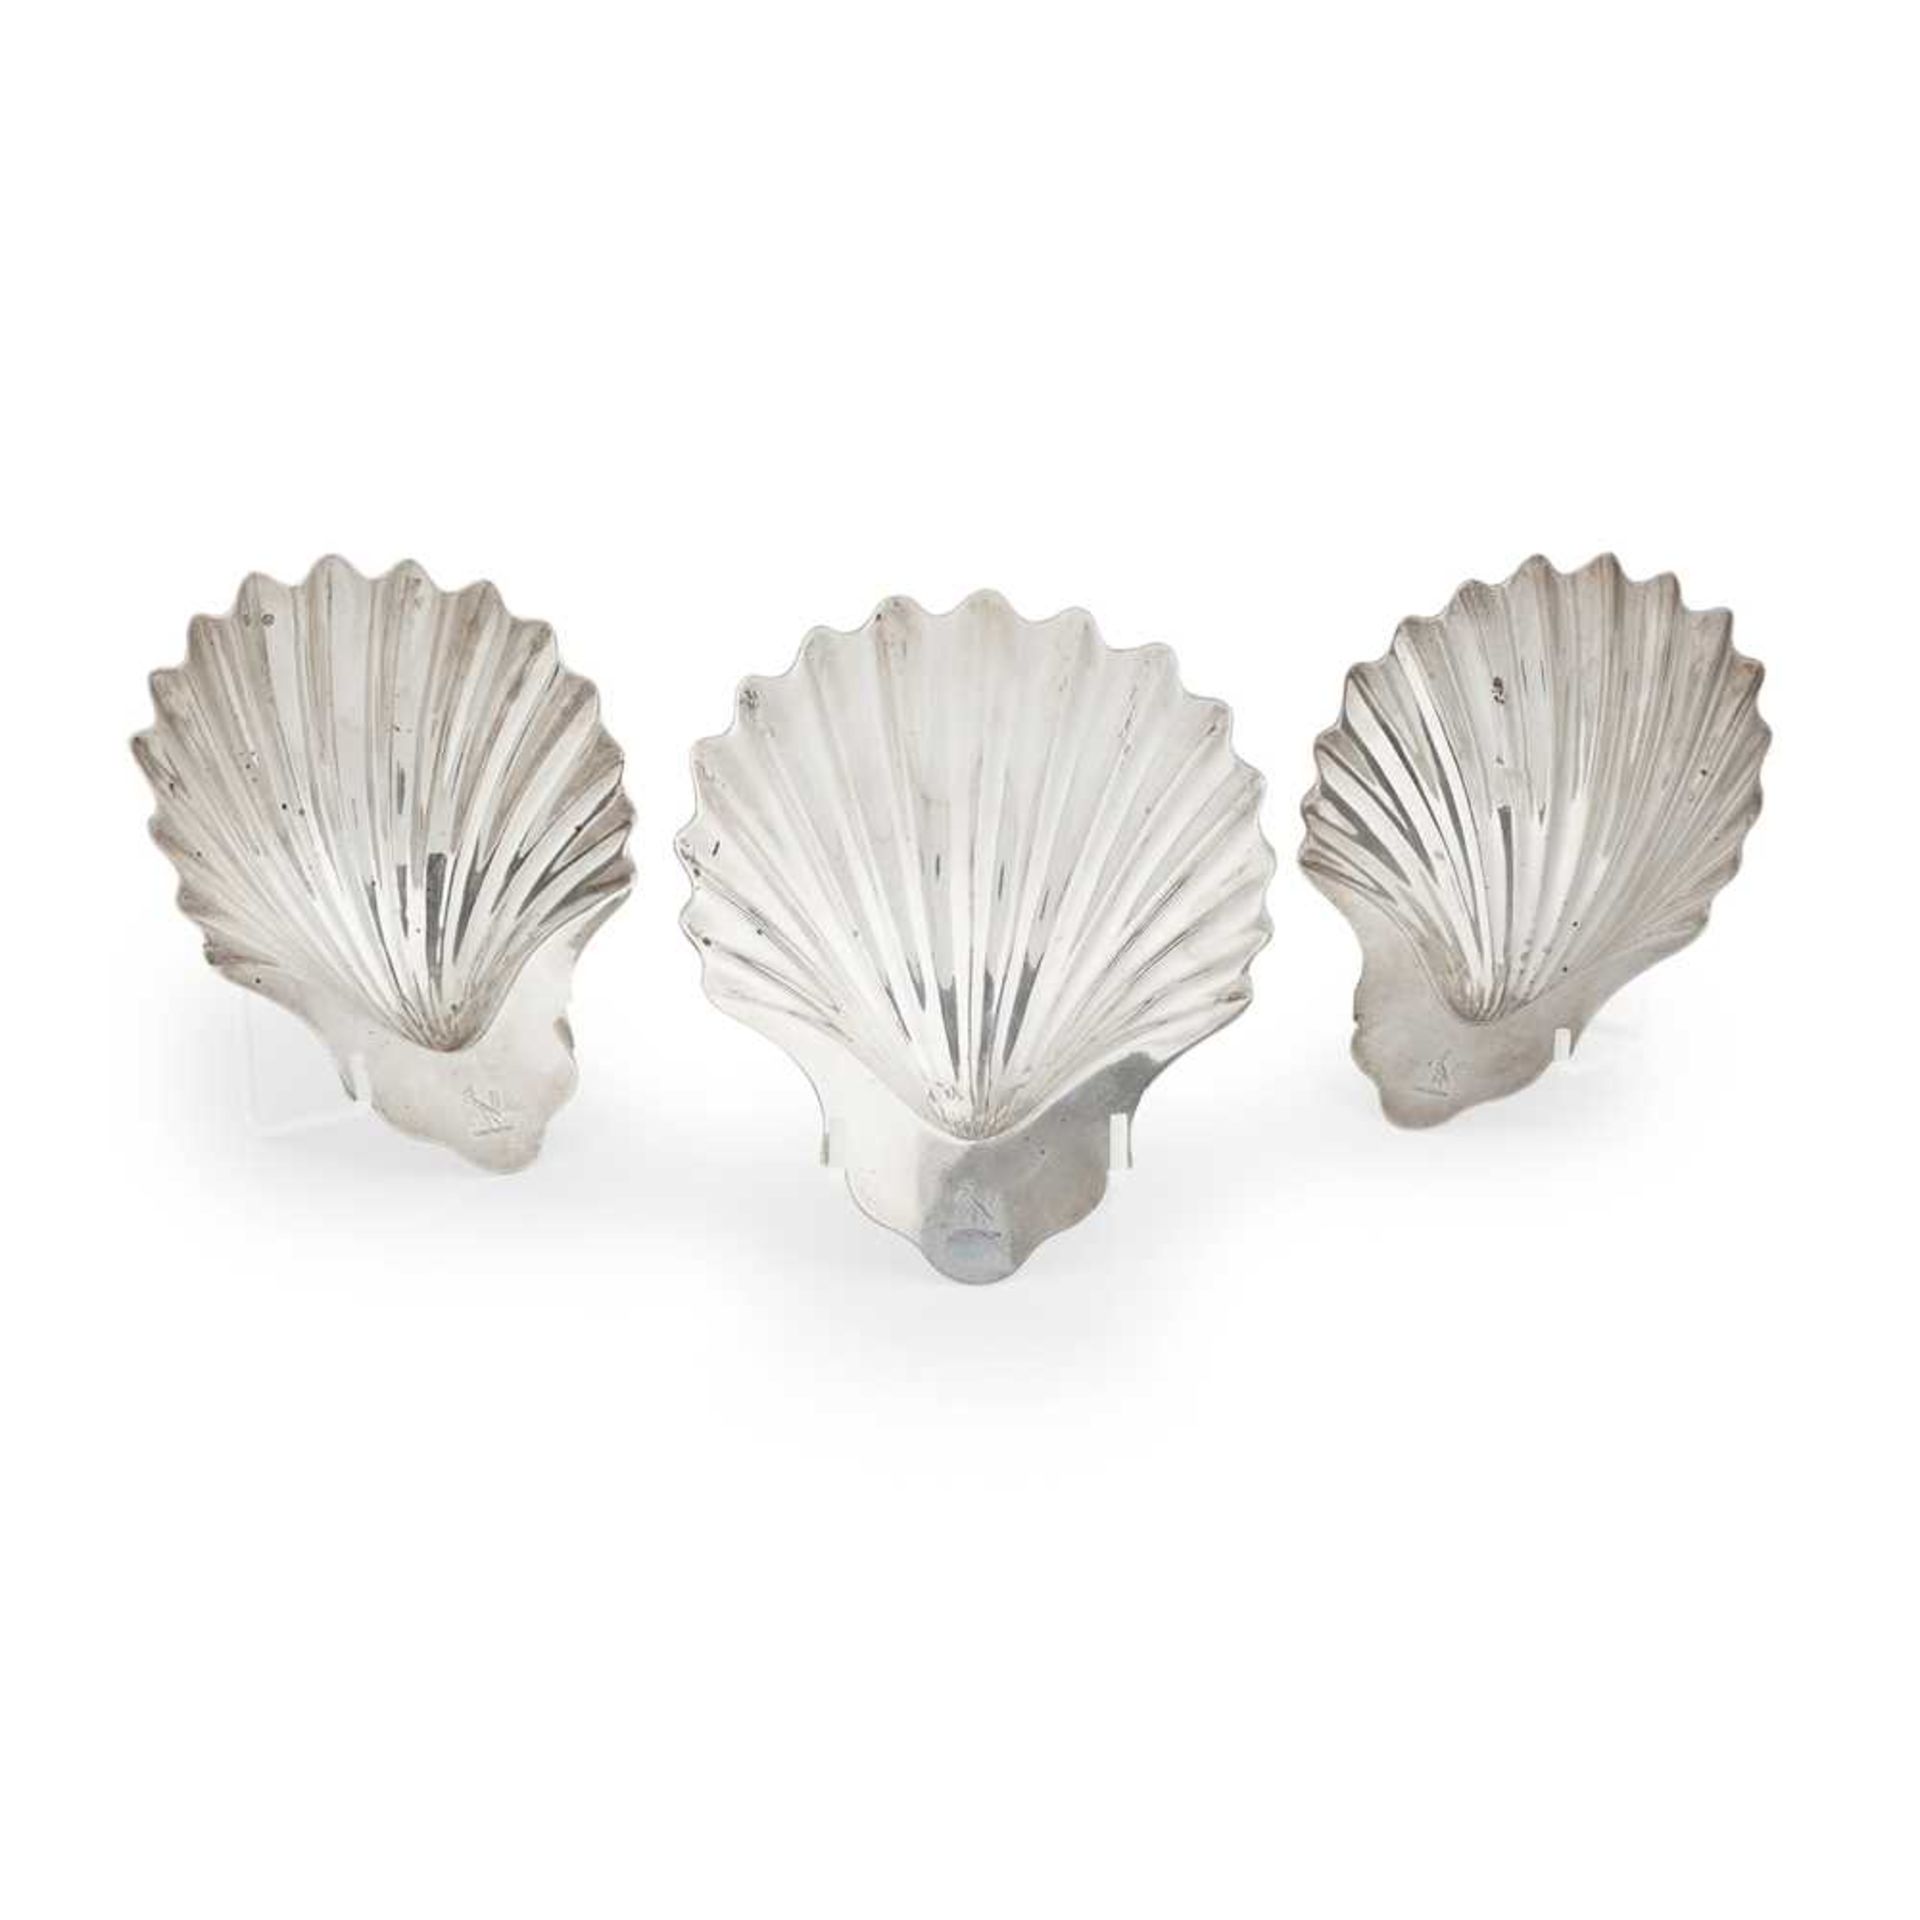 A set of three George III scallop butter dishes